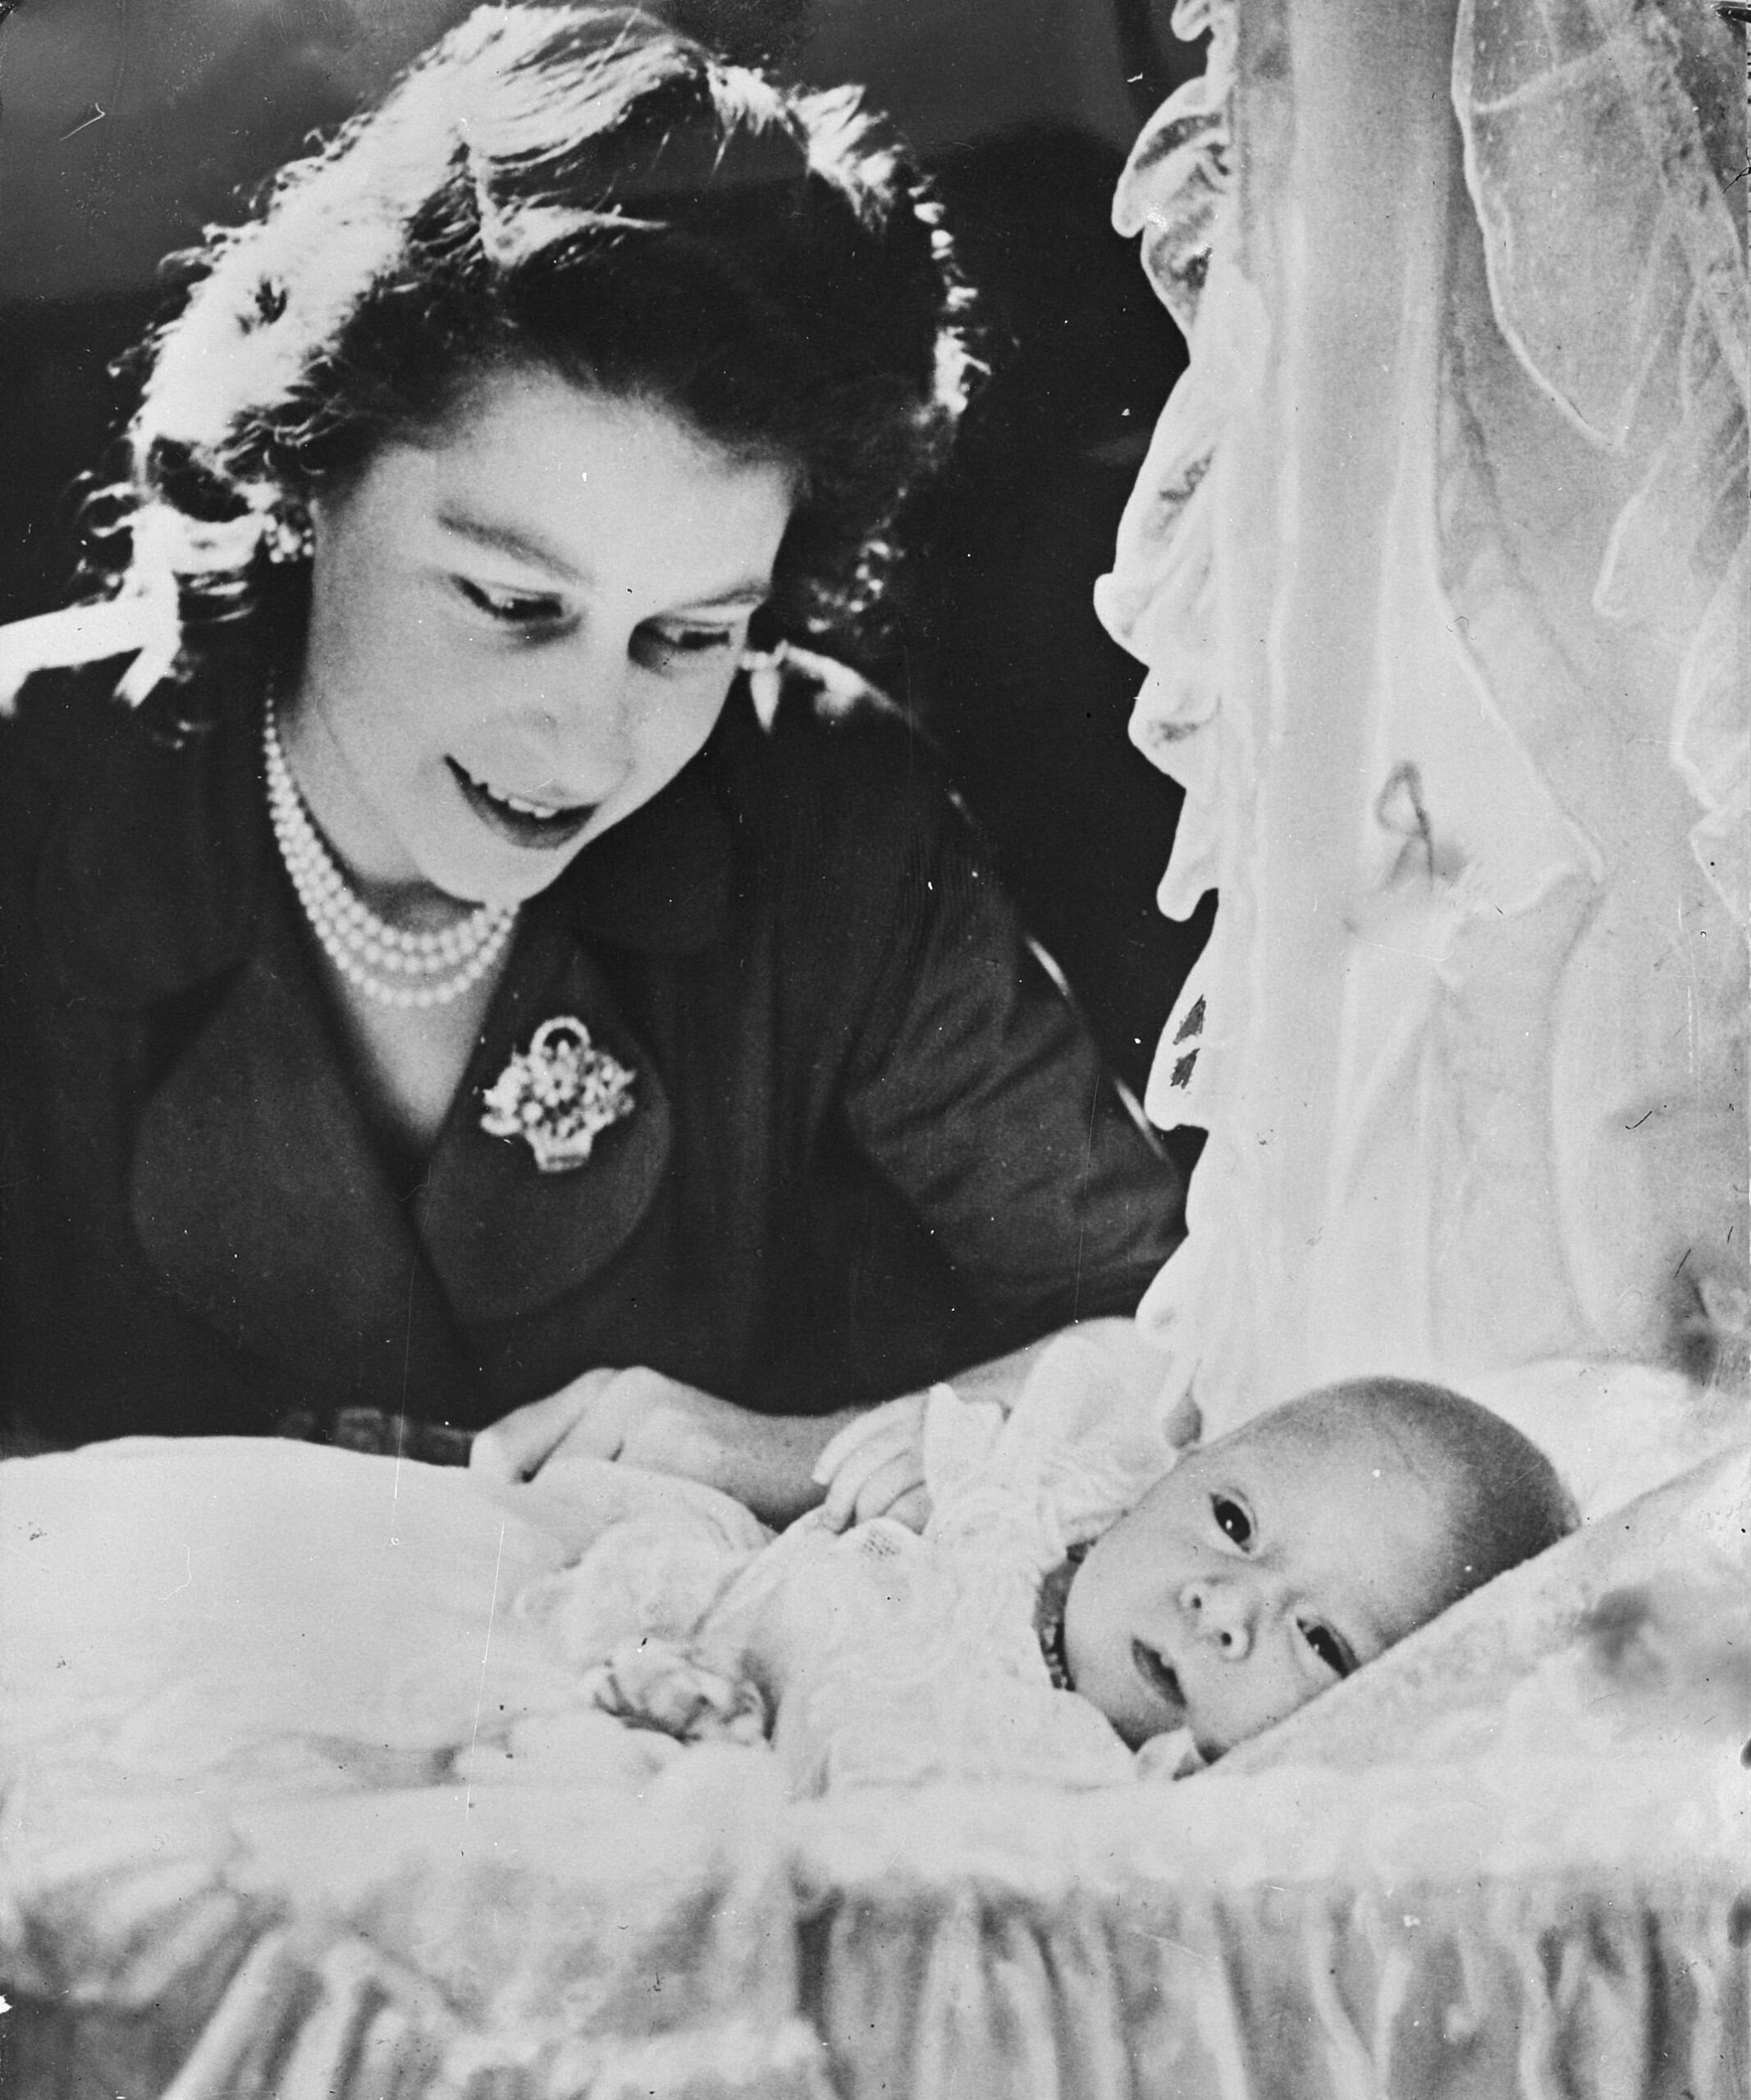 Princess Elizabeth and the baby Prince Charles